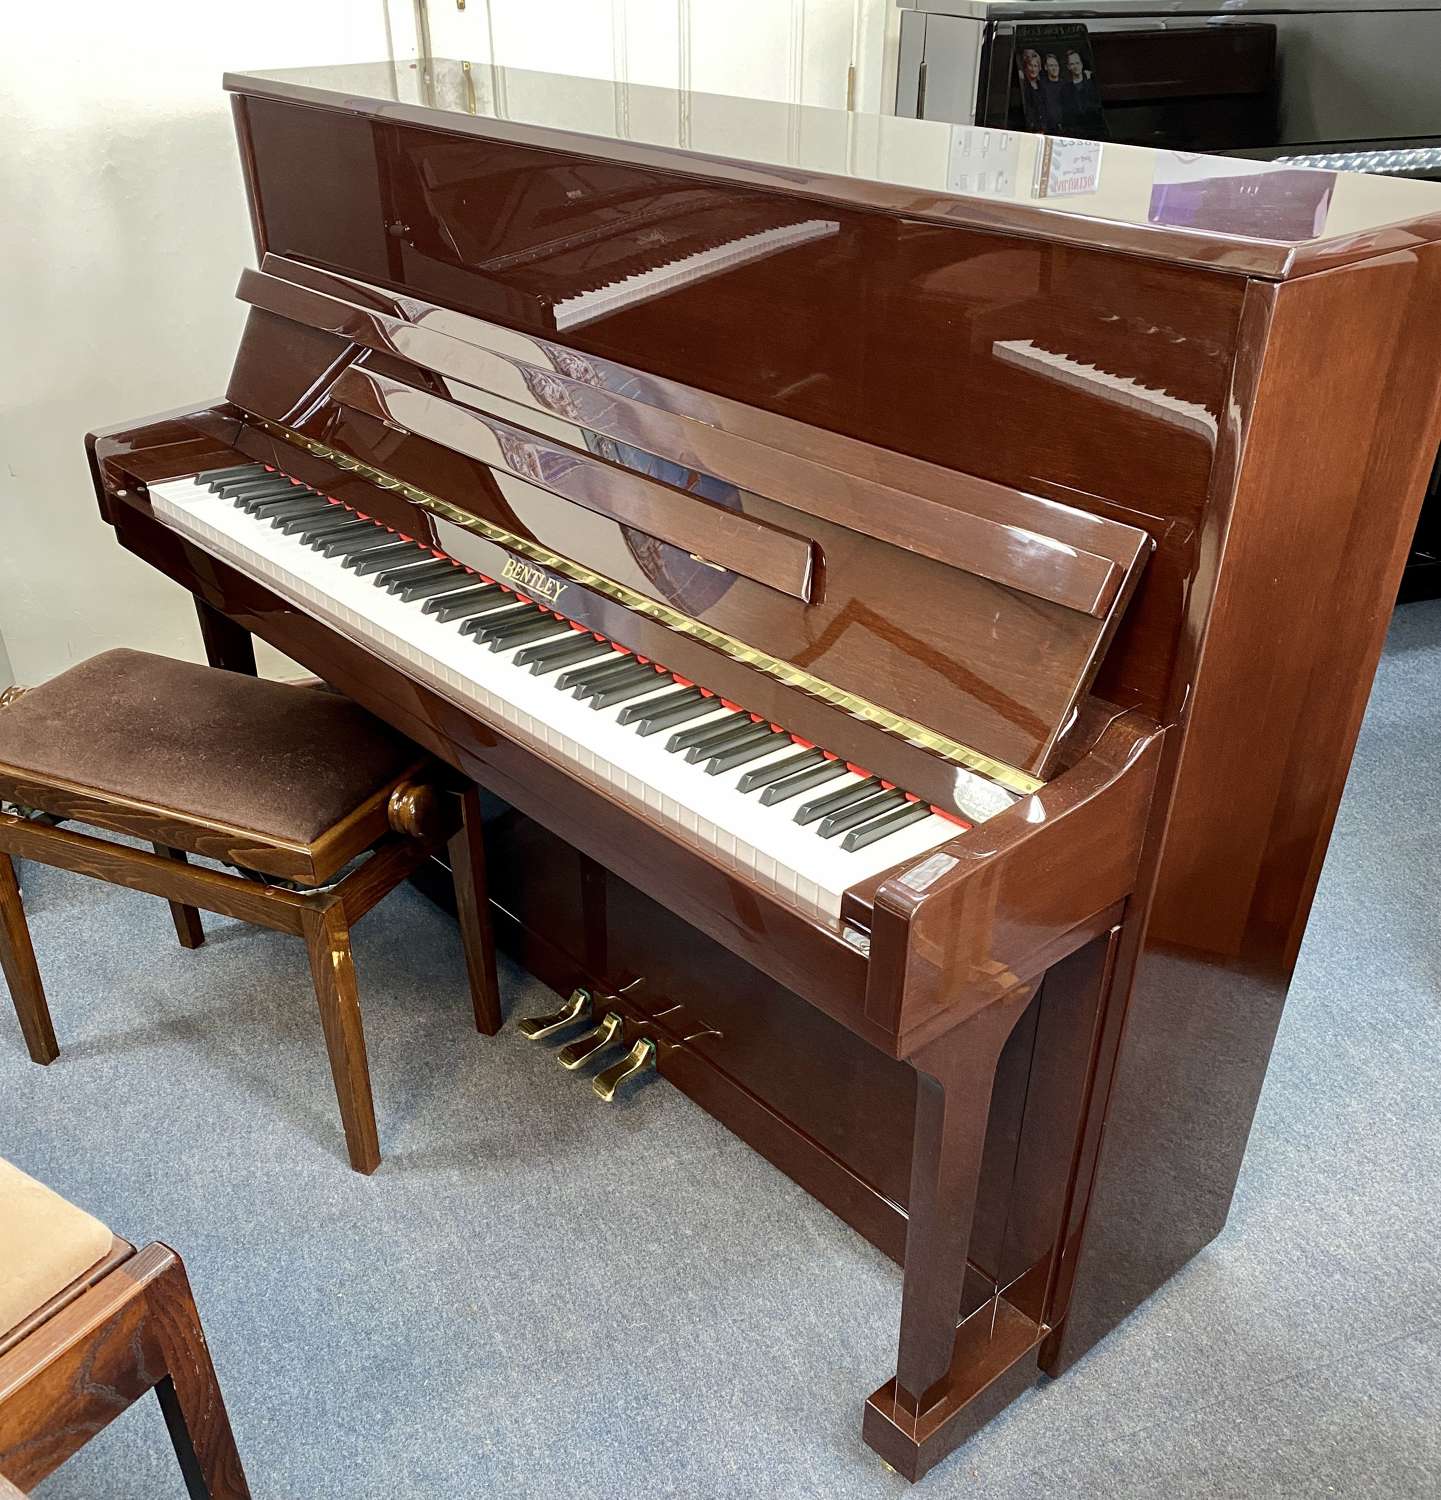 Bentley modern piano for sale